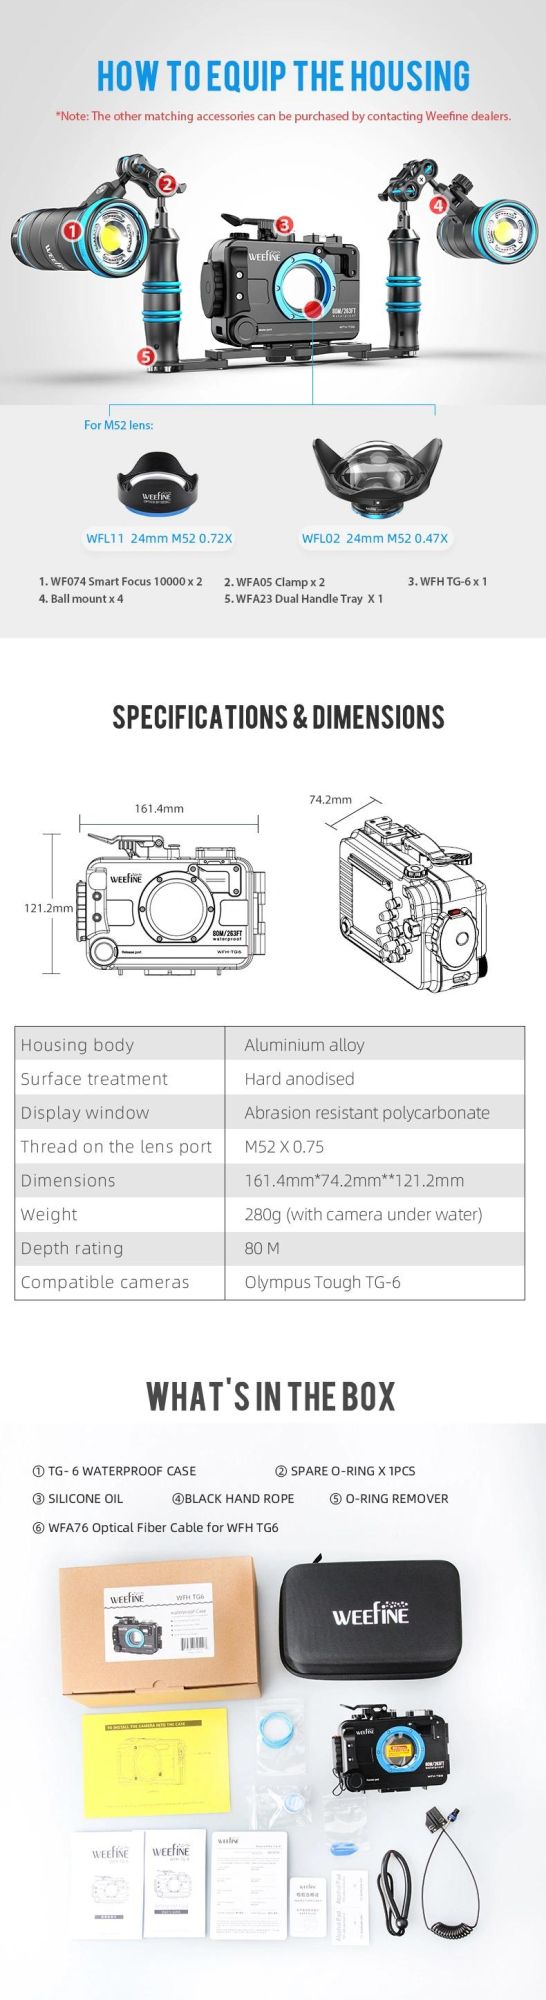 Smart Waterproof Camera Housing Tg-6 with Built-in Automatic Vacuum System for Photography